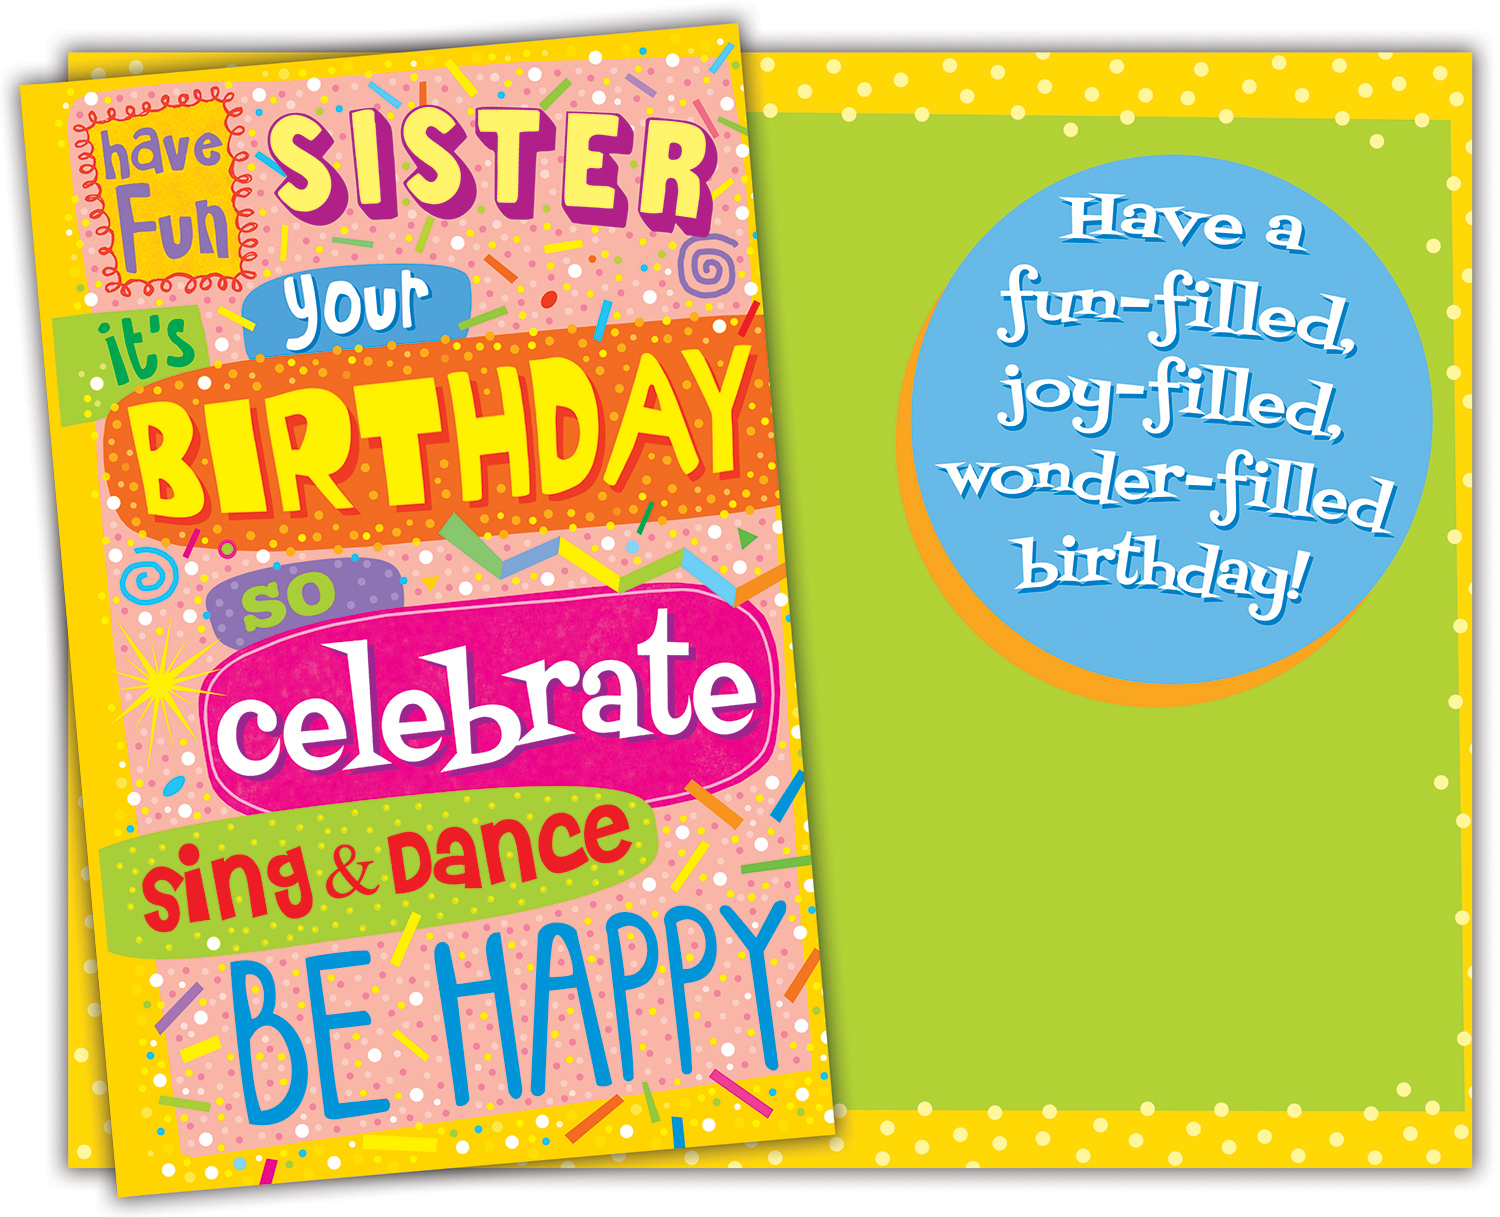 birthday greetings card for sister